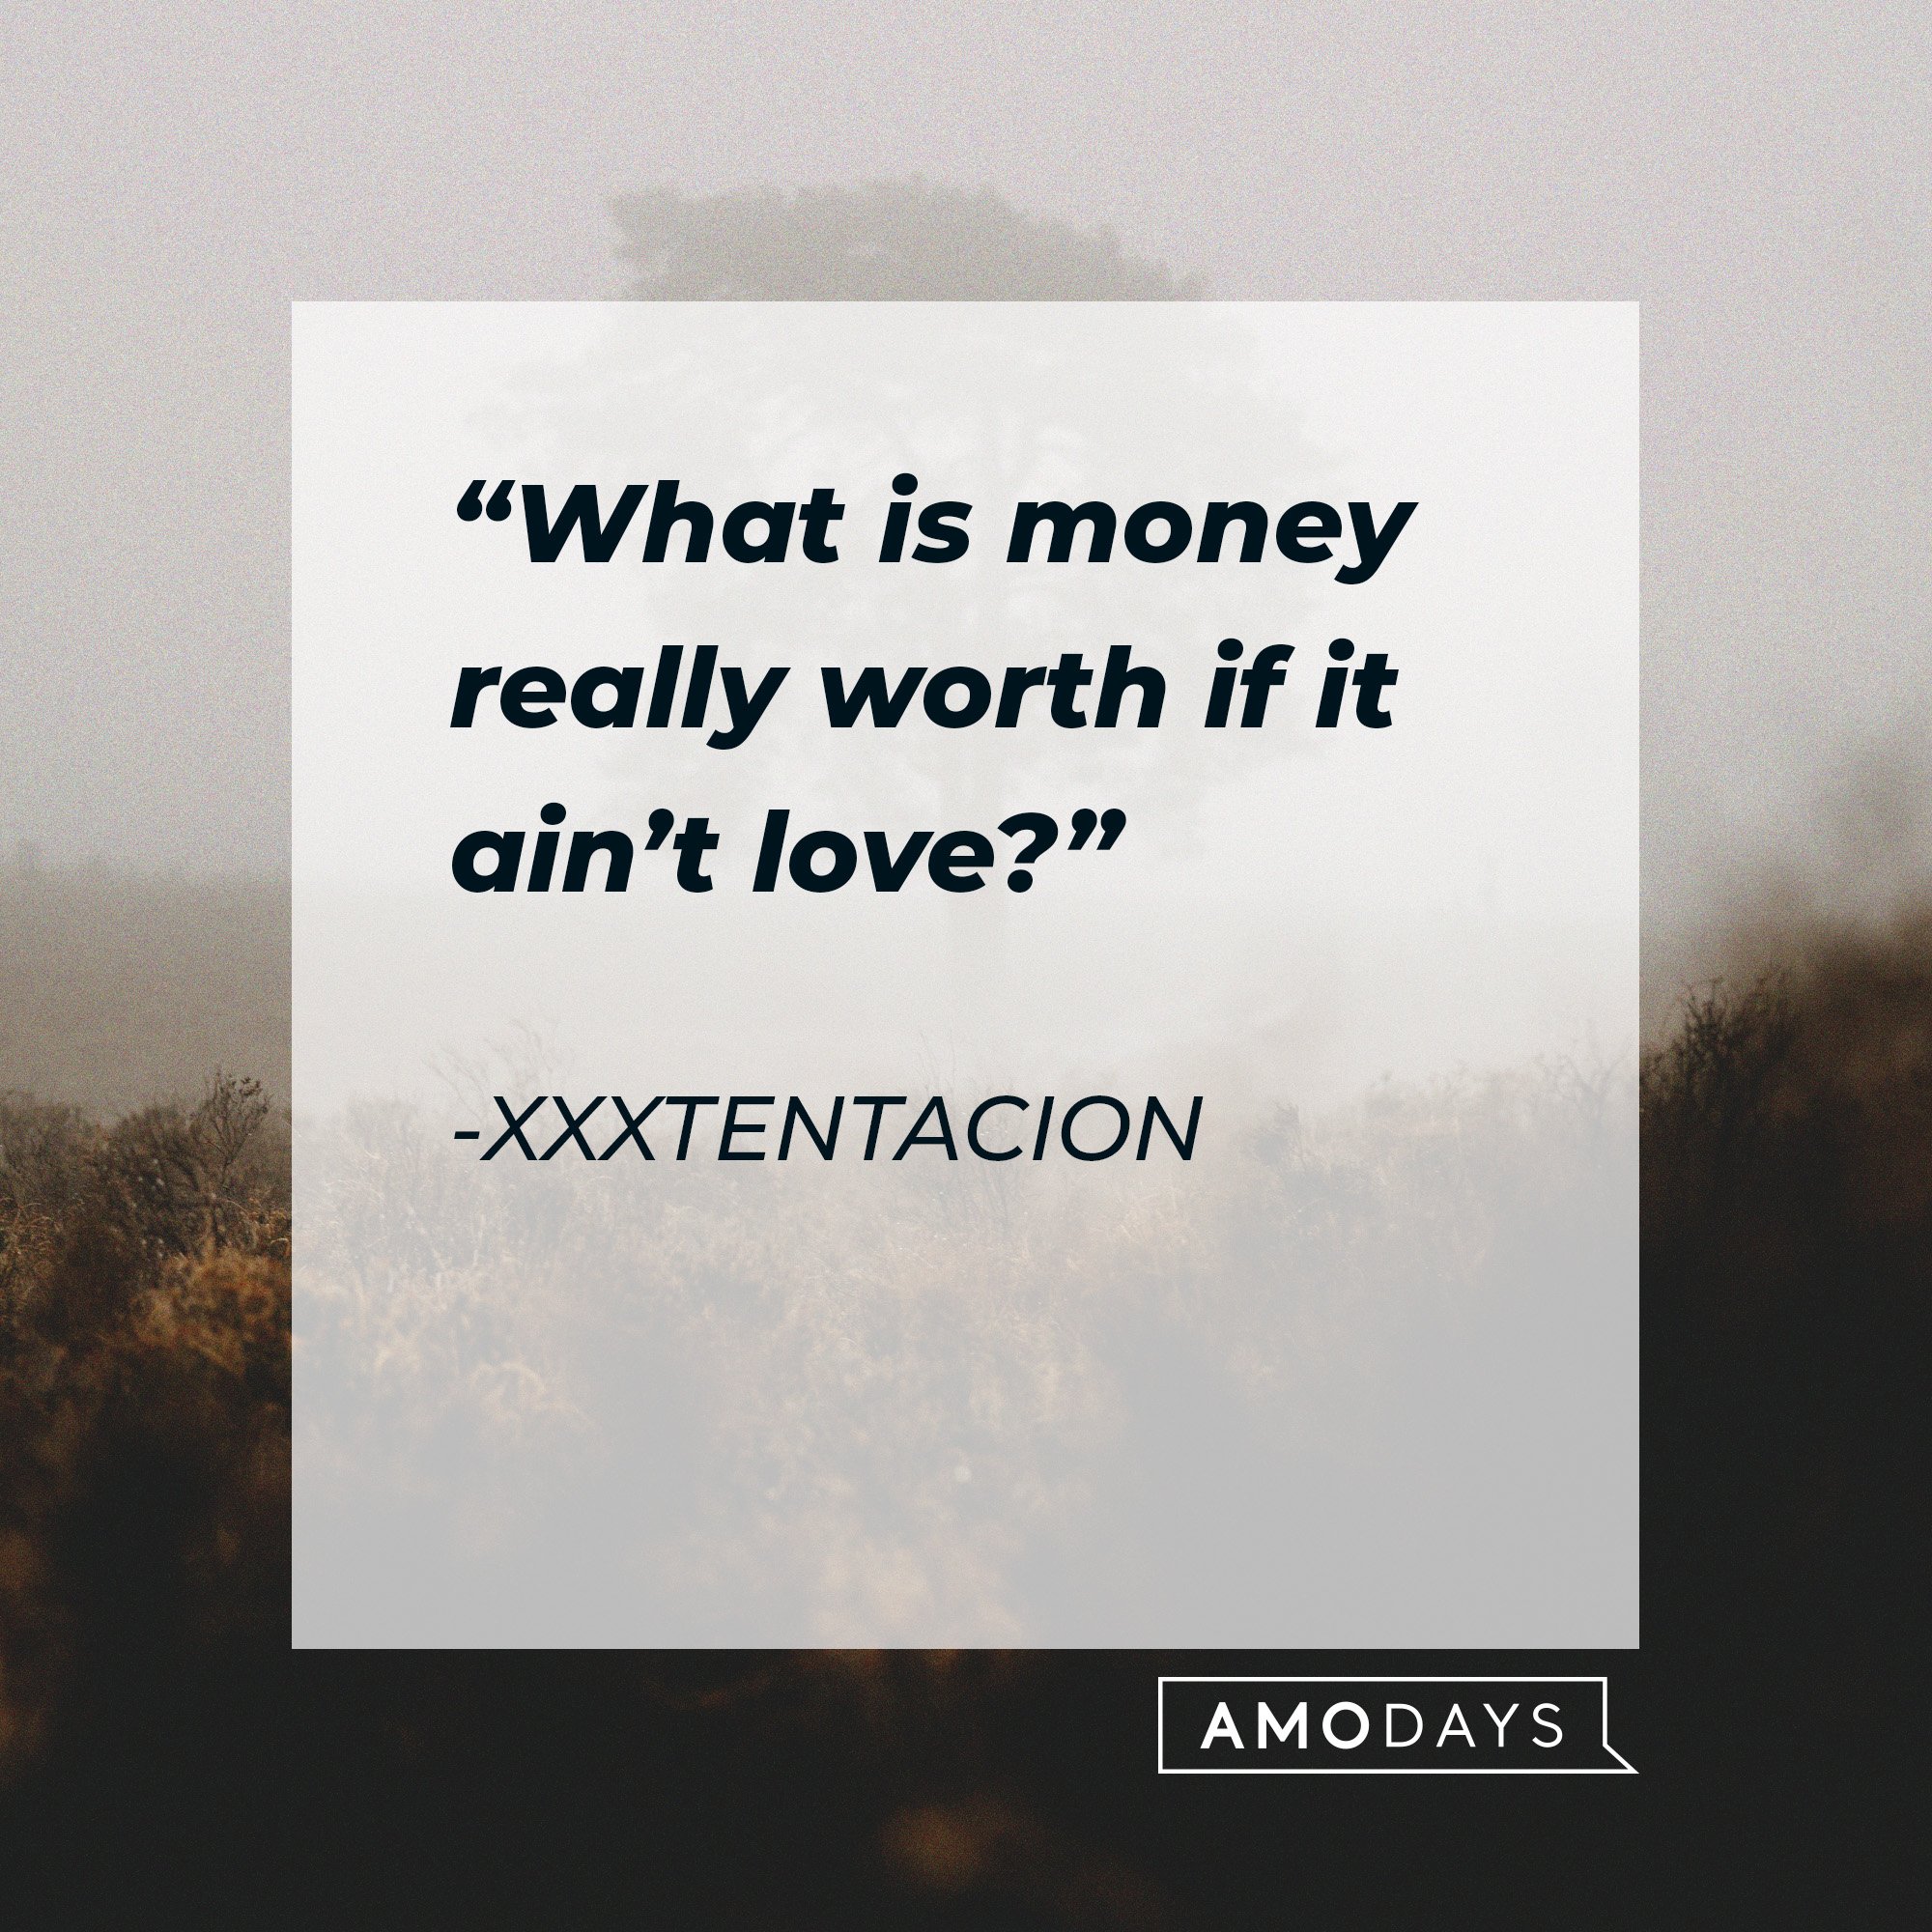 Xxxtentacion’s quote: “What is money really worth if it ain’t love?” | Image: AmoDays